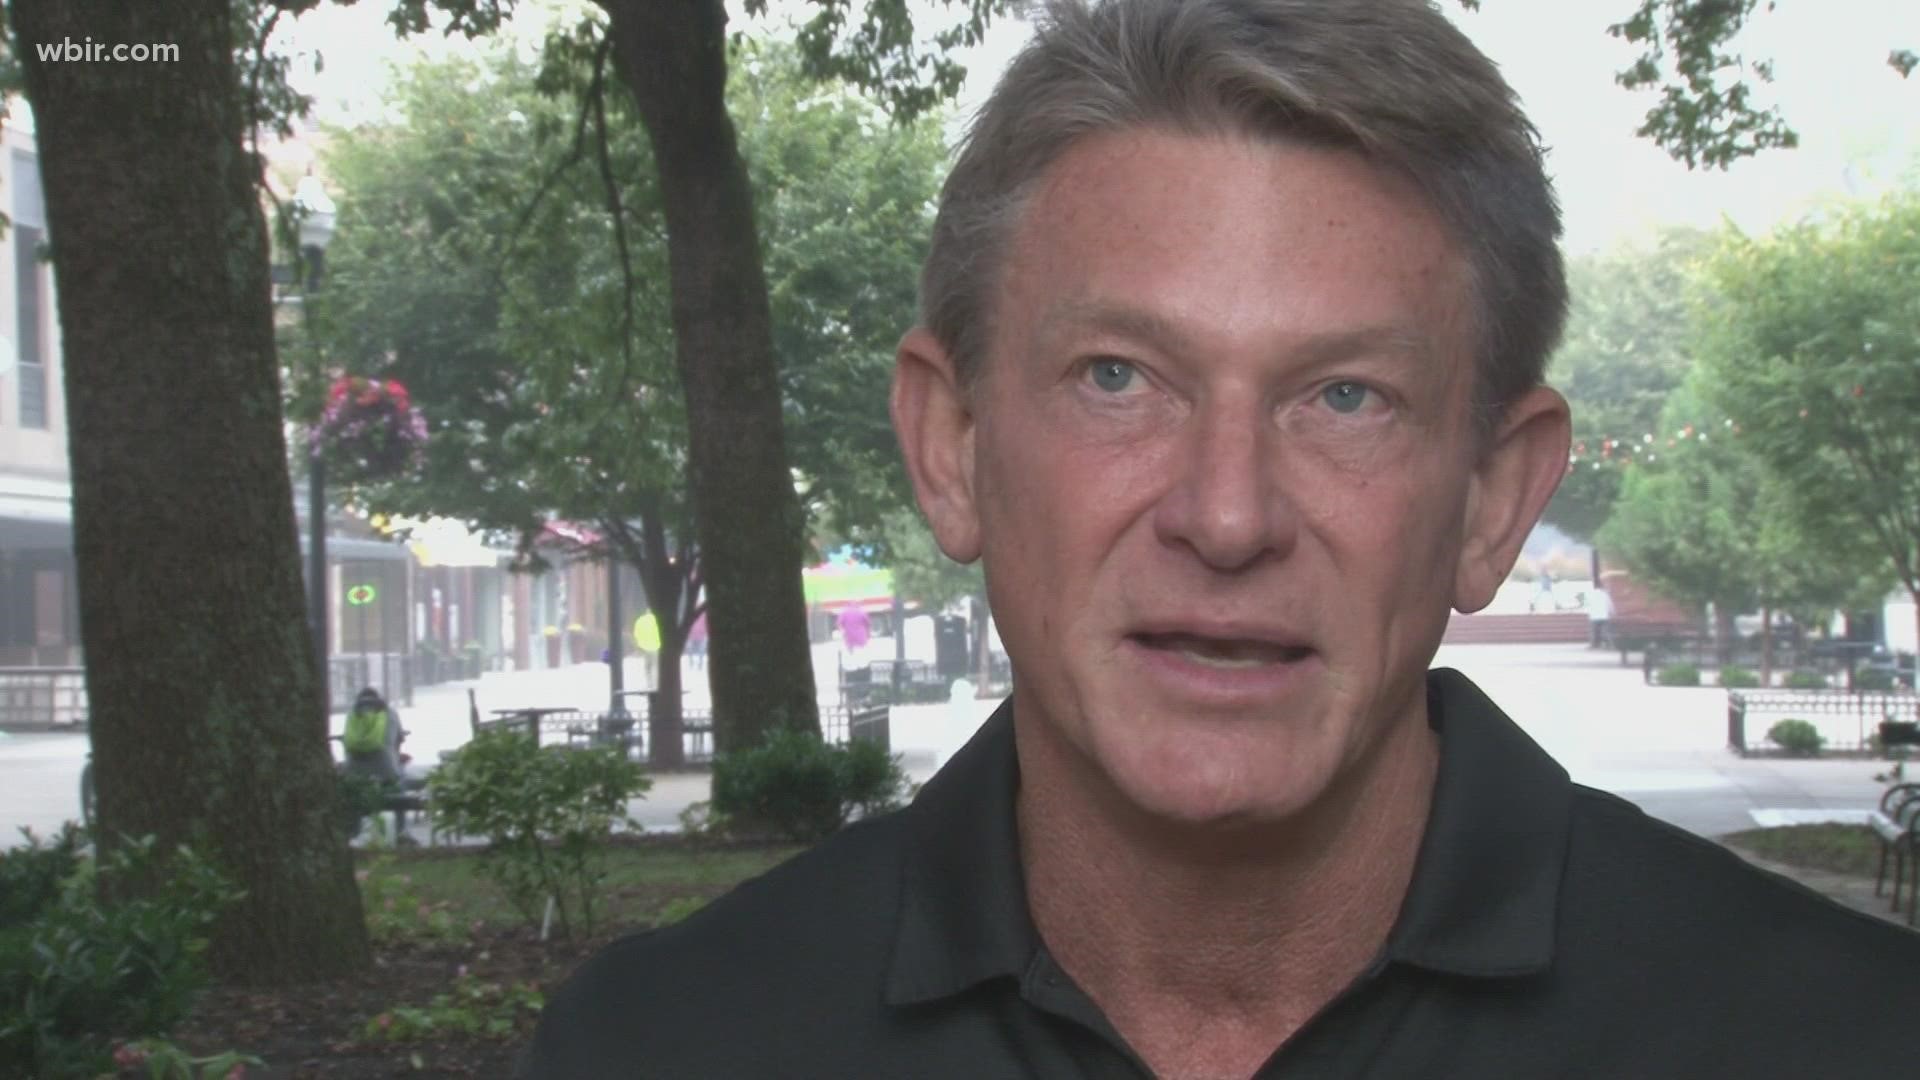 UT President Randy Boyd did not attend the fundraiser event this morning and says he never intended to host the event.